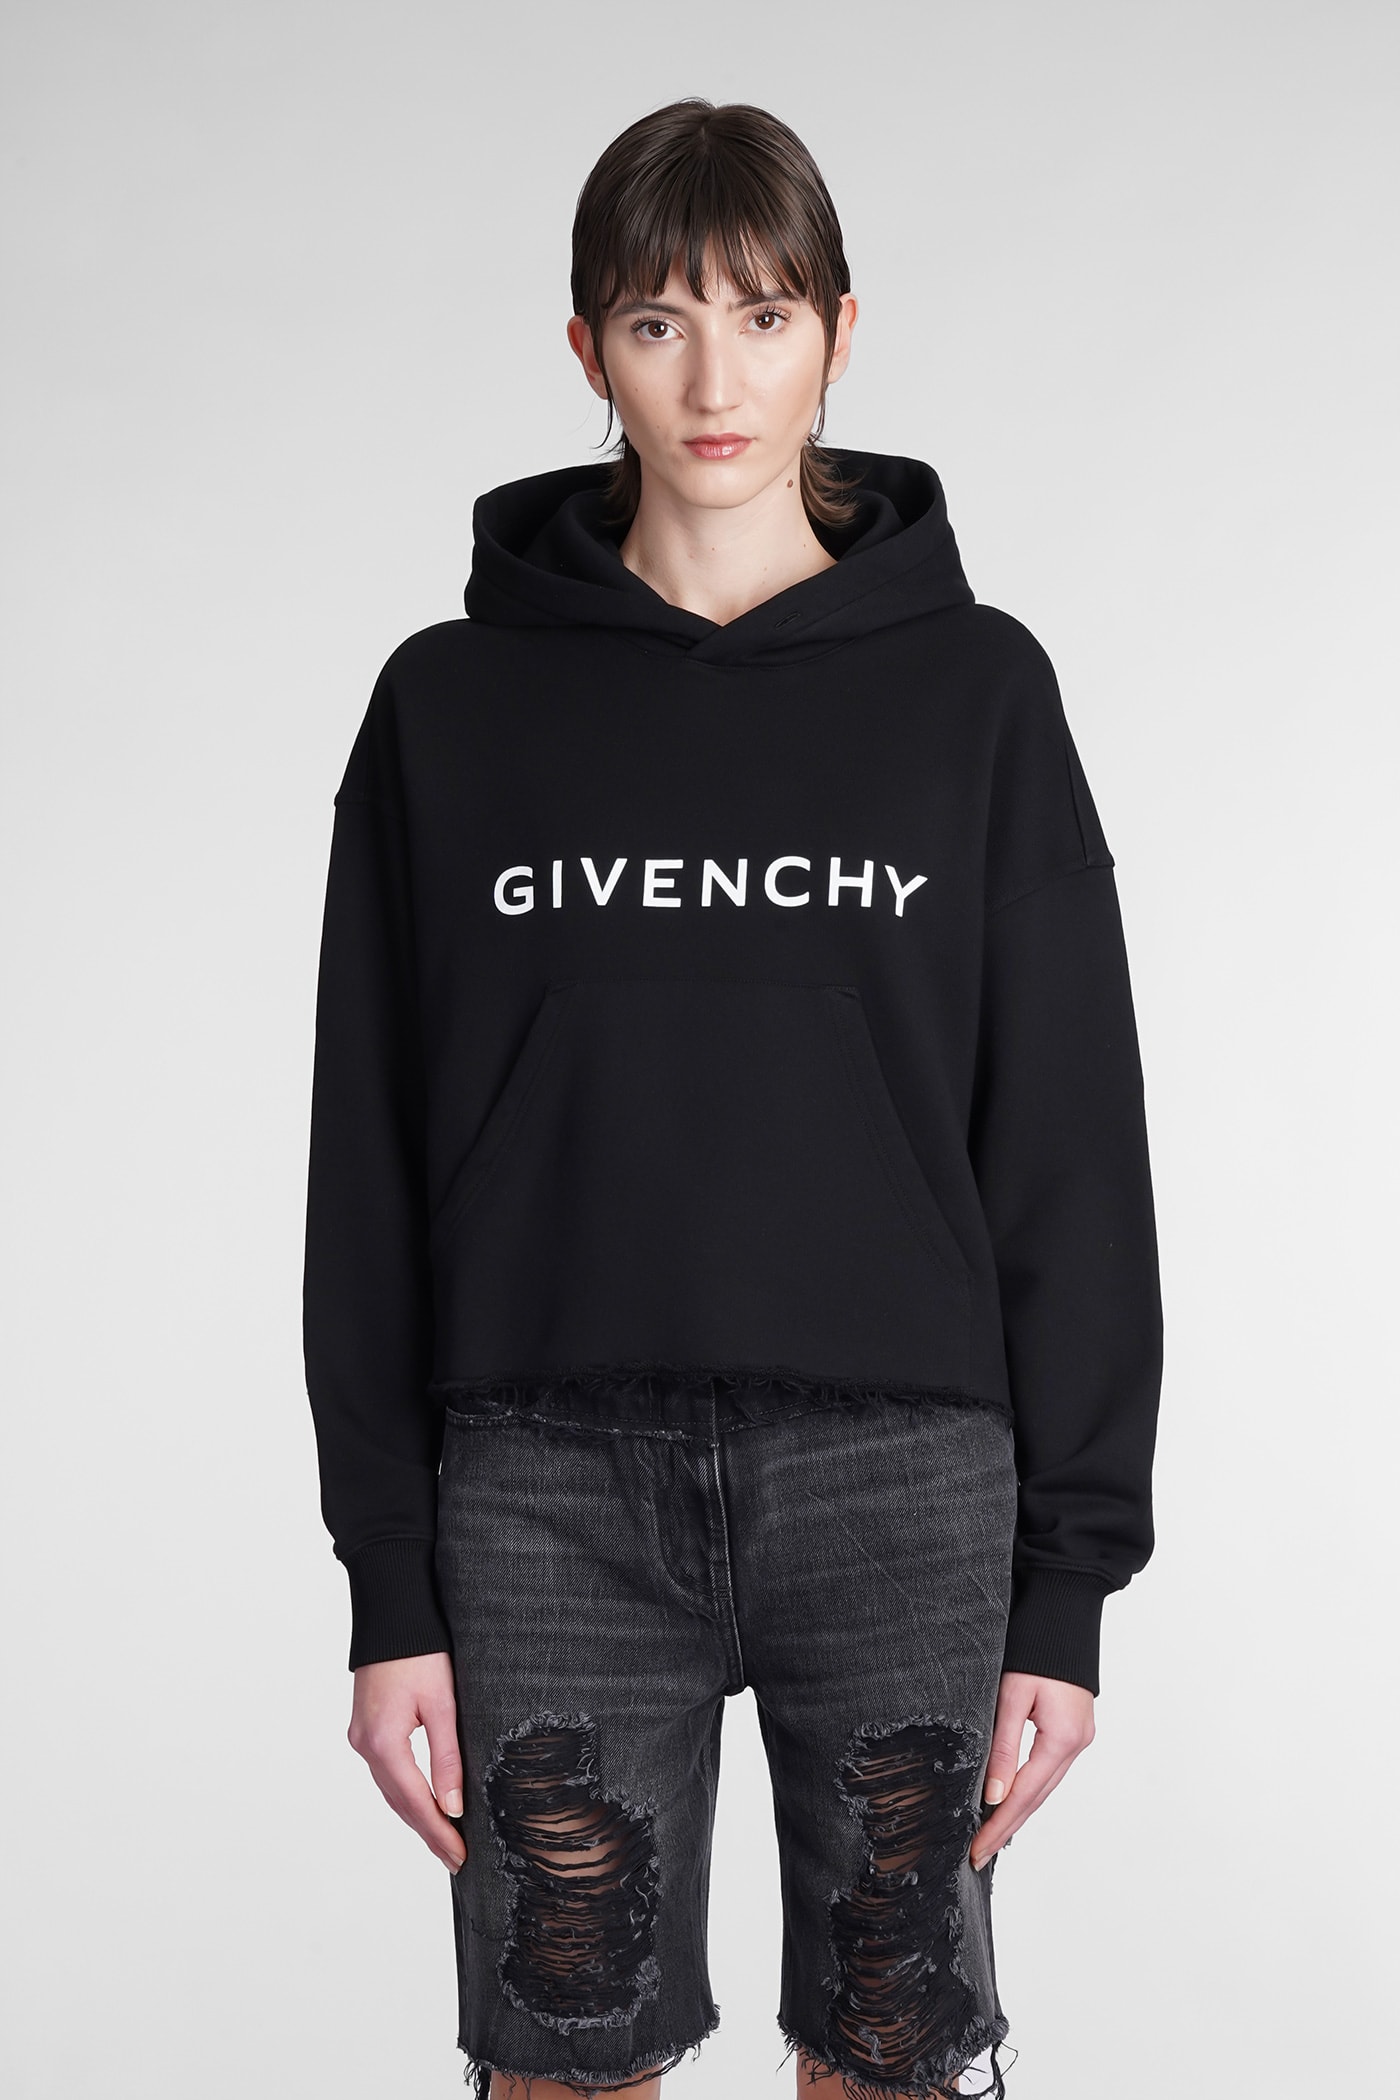 GIVENCHY SWEATSHIRT IN BLACK COTTON